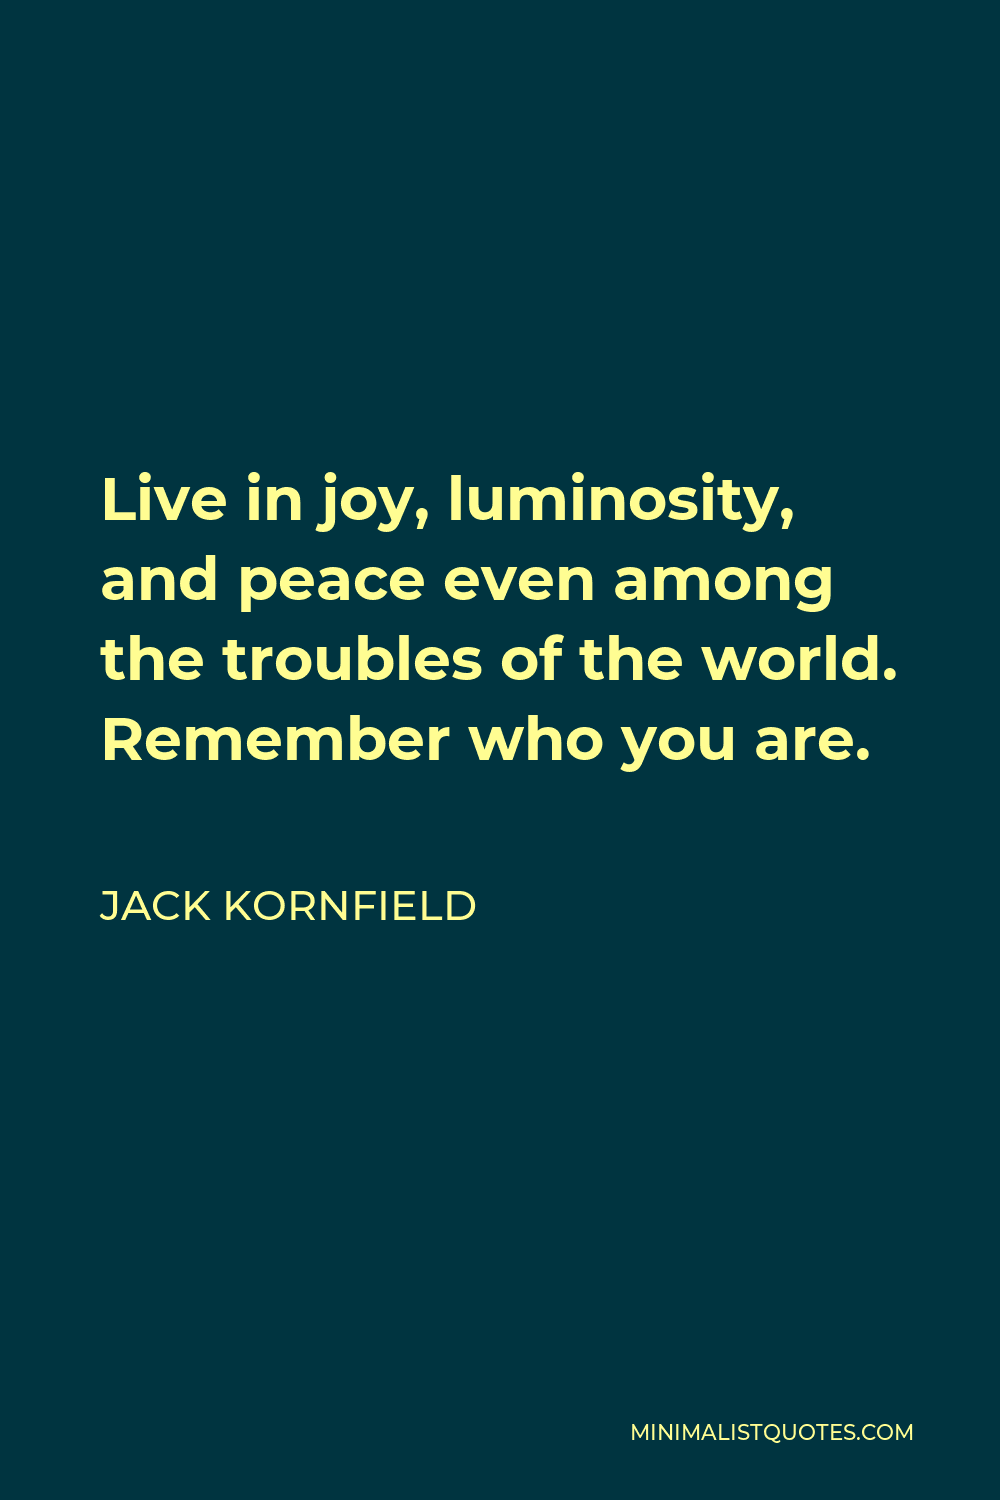 Jack Kornfield Quote - Live in joy, luminosity, and peace even among the troubles of the world. Remember who you are.